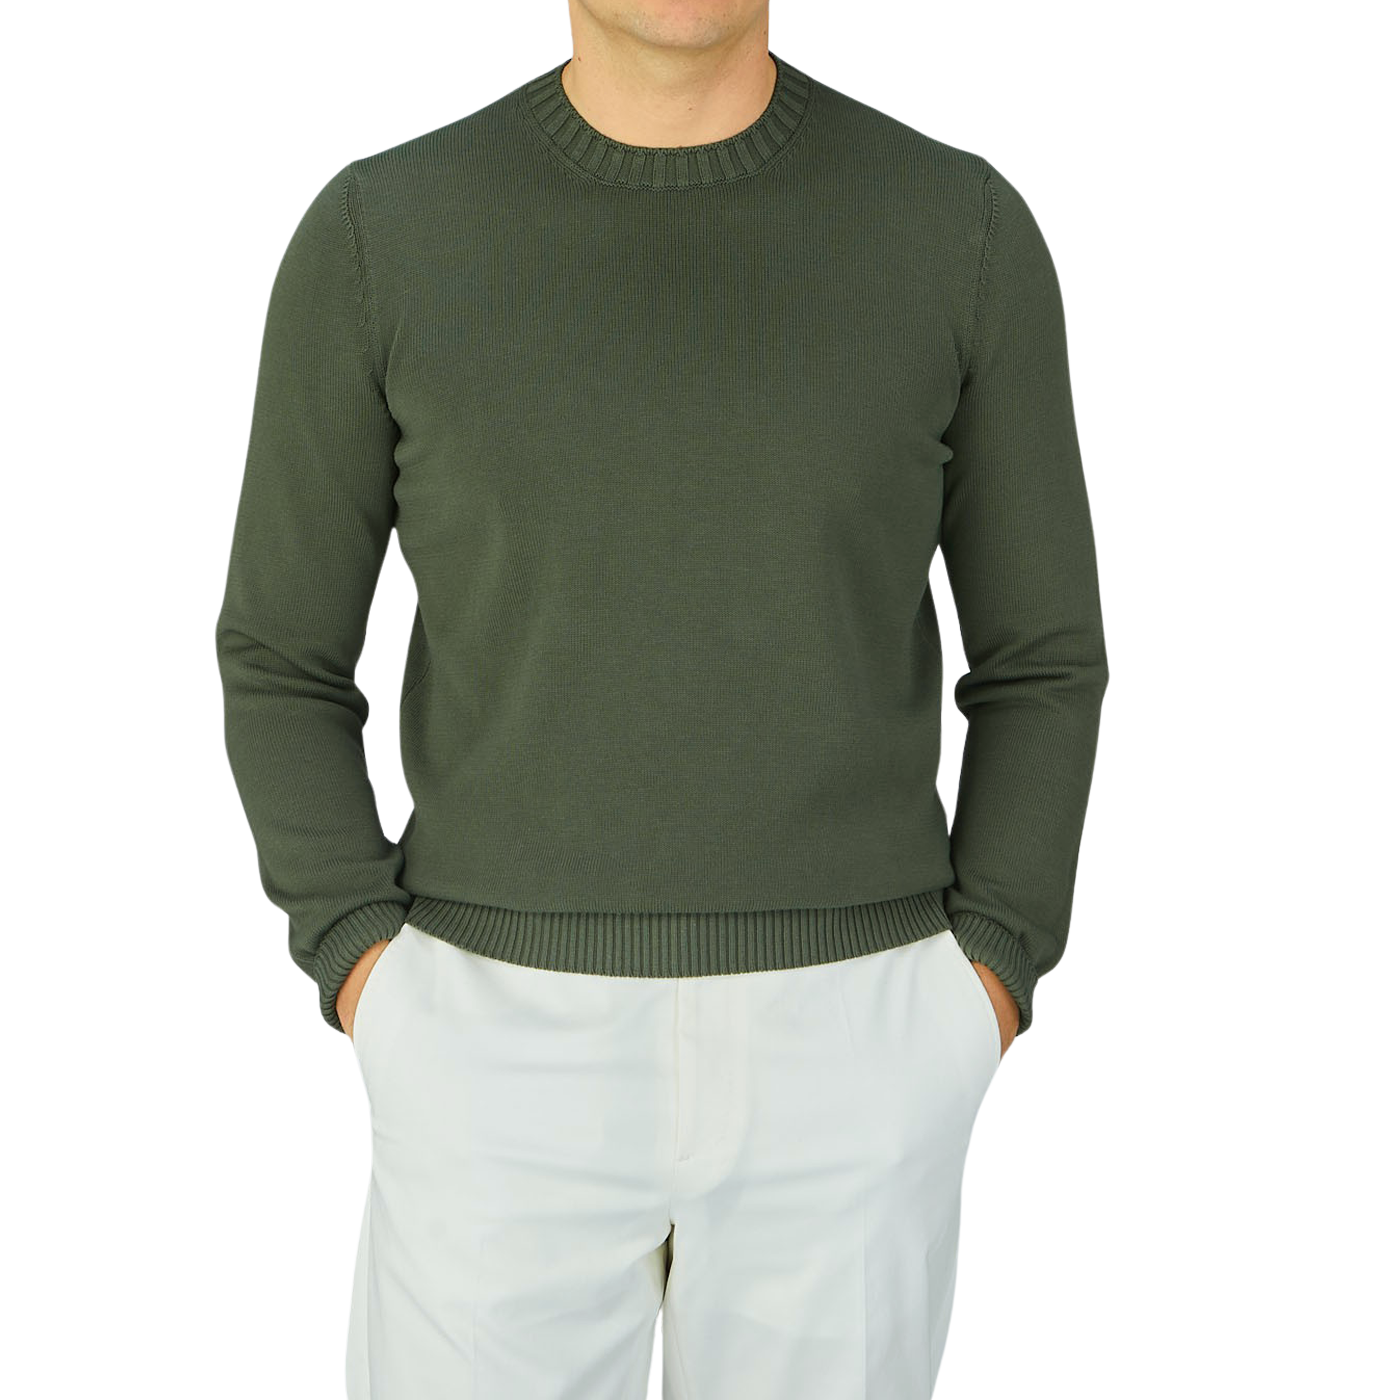 A man wearing a Gran Sasso Dark Green Egyptian Cotton Crewneck Sweater, paired with white pants.